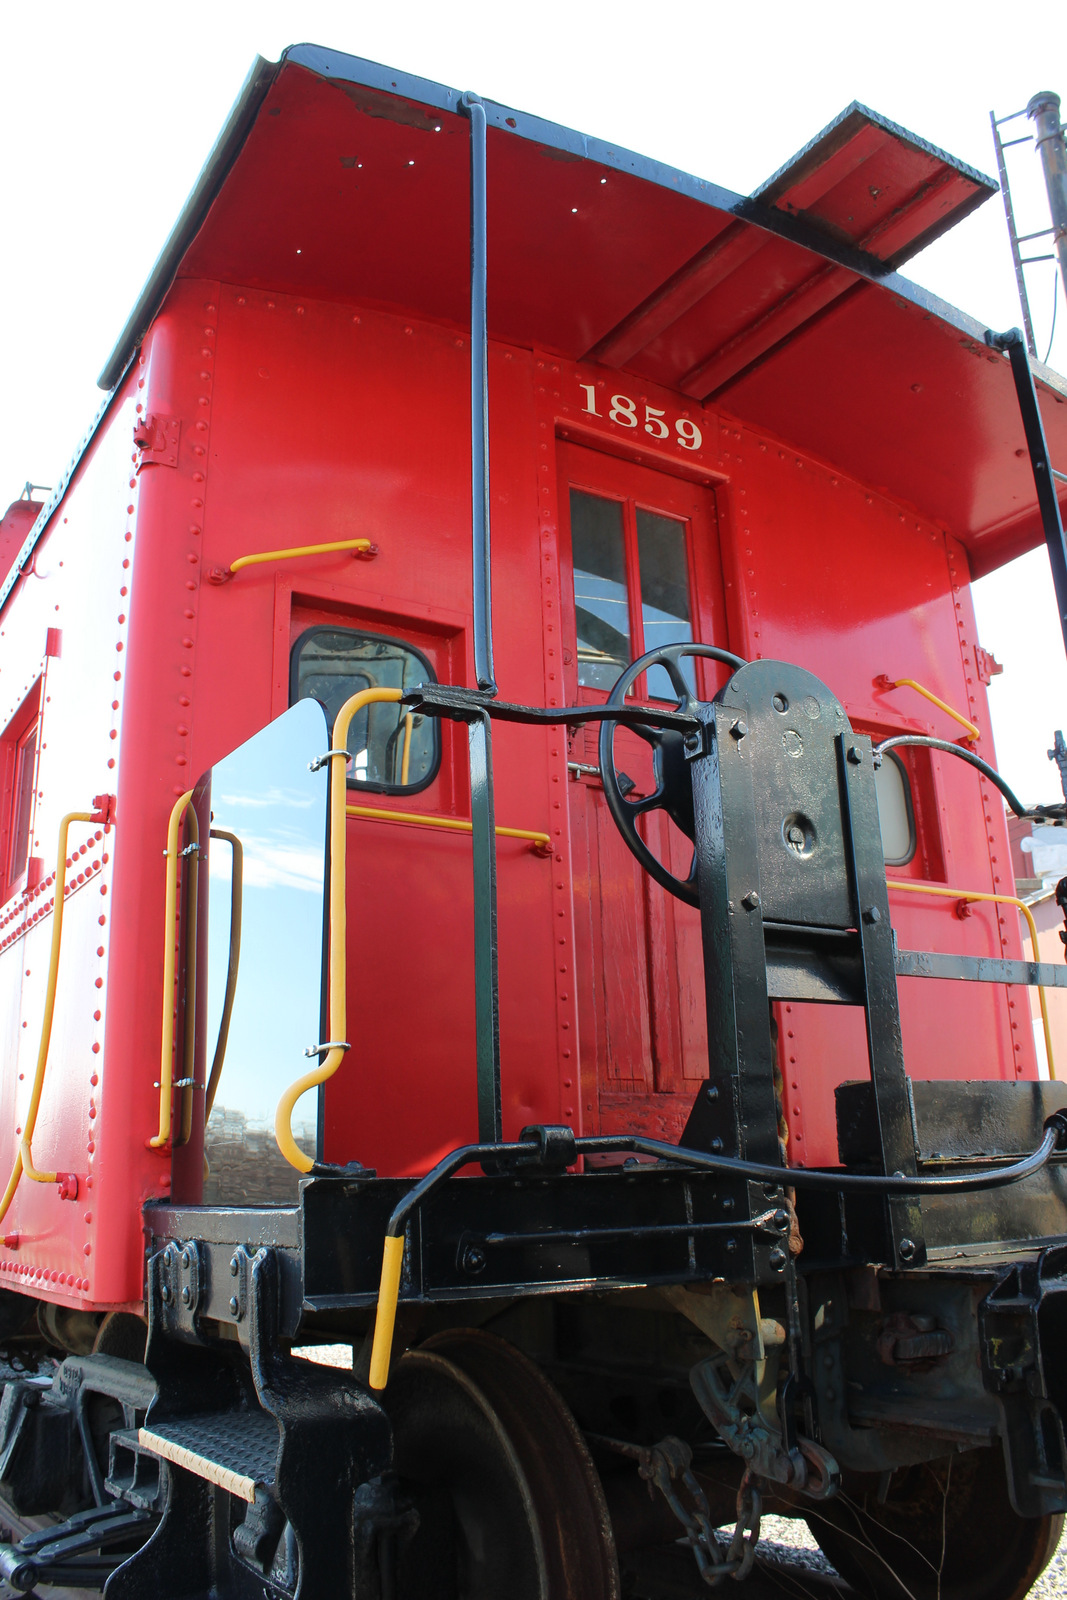 Rolling stock at the Hagerstown Roundhouse Museum - end view of a Western Maryland caboose 1859.